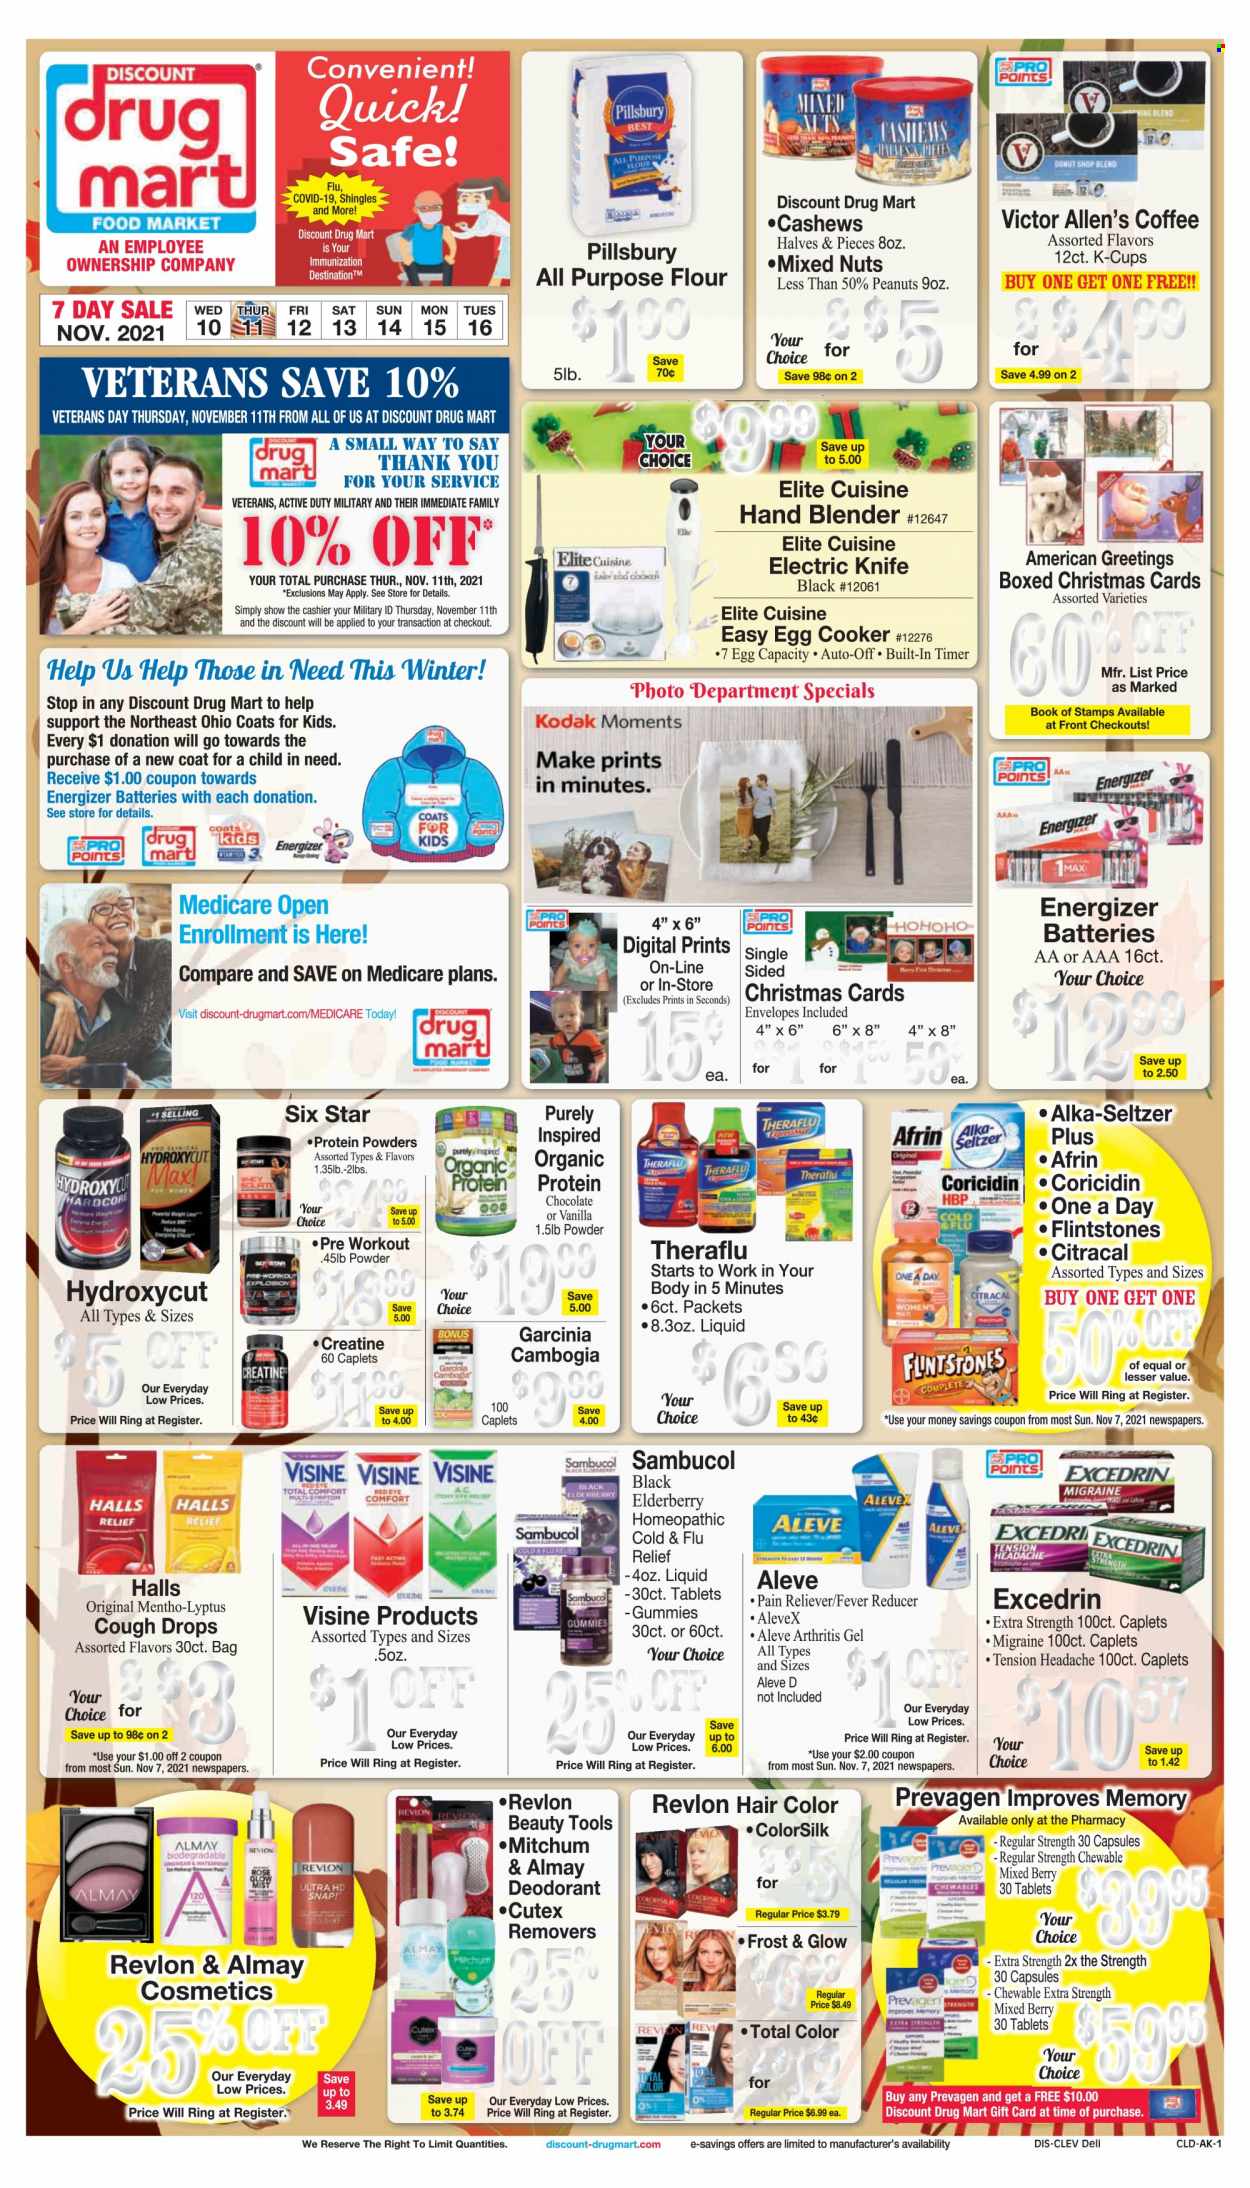 thumbnail - Discount Drug Mart Flyer - 11/10/2021 - 11/16/2021 - Sales products - Pillsbury, eggs, Halls, chocolate, all purpose flour, flour, cashews, peanuts, mixed nuts, coffee, coffee capsules, K-Cups, Almay, Revlon, hair color, anti-perspirant, deodorant, bag, knife, envelope, battery, Energizer, book, Moments, UHD TV, ultra hd, rose, Afrin, Aleve, Coricidin, Cold & Flu, Excedrin, Theraflu, Alka-seltzer, cough drops, Sambucol. Page 1.